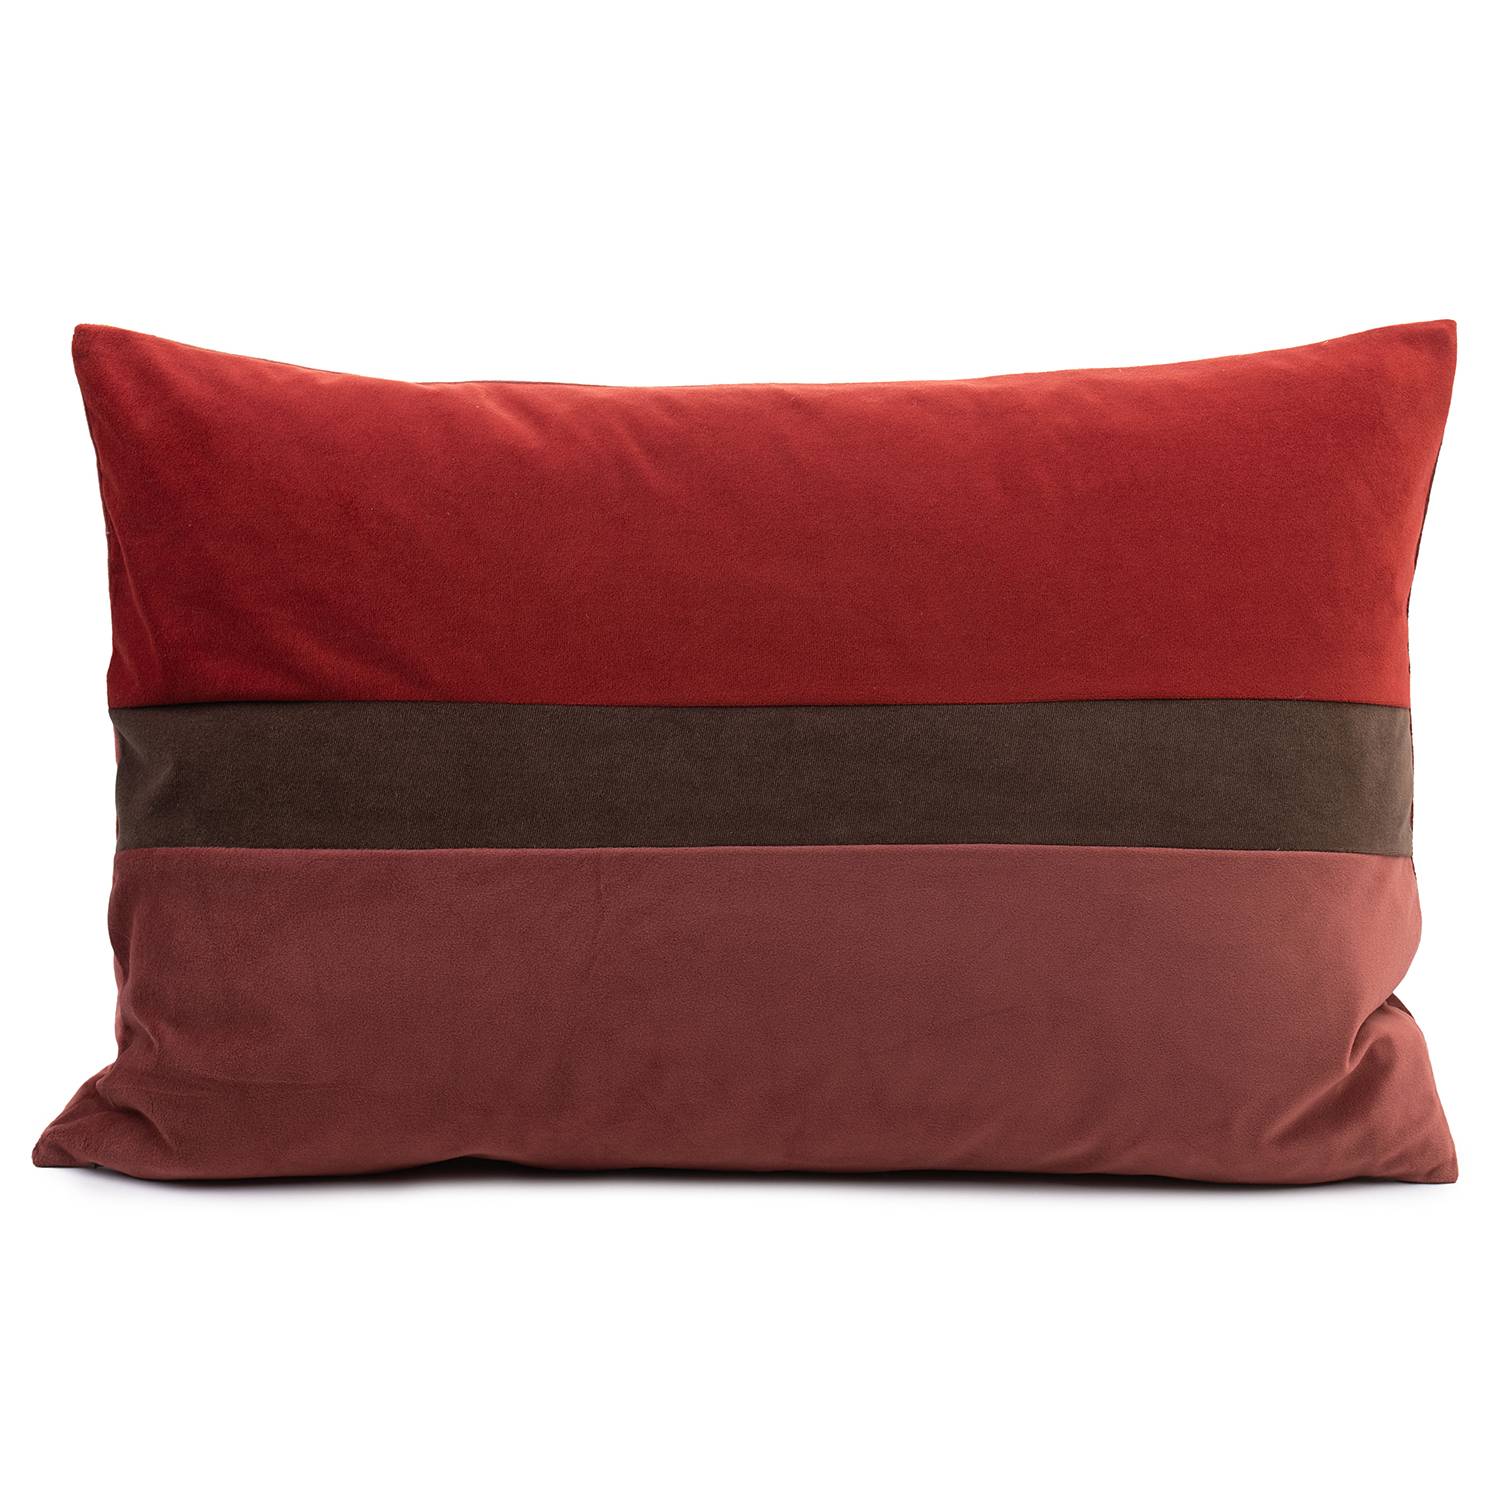 Image of Housse de coussin Pino 000000001000243537